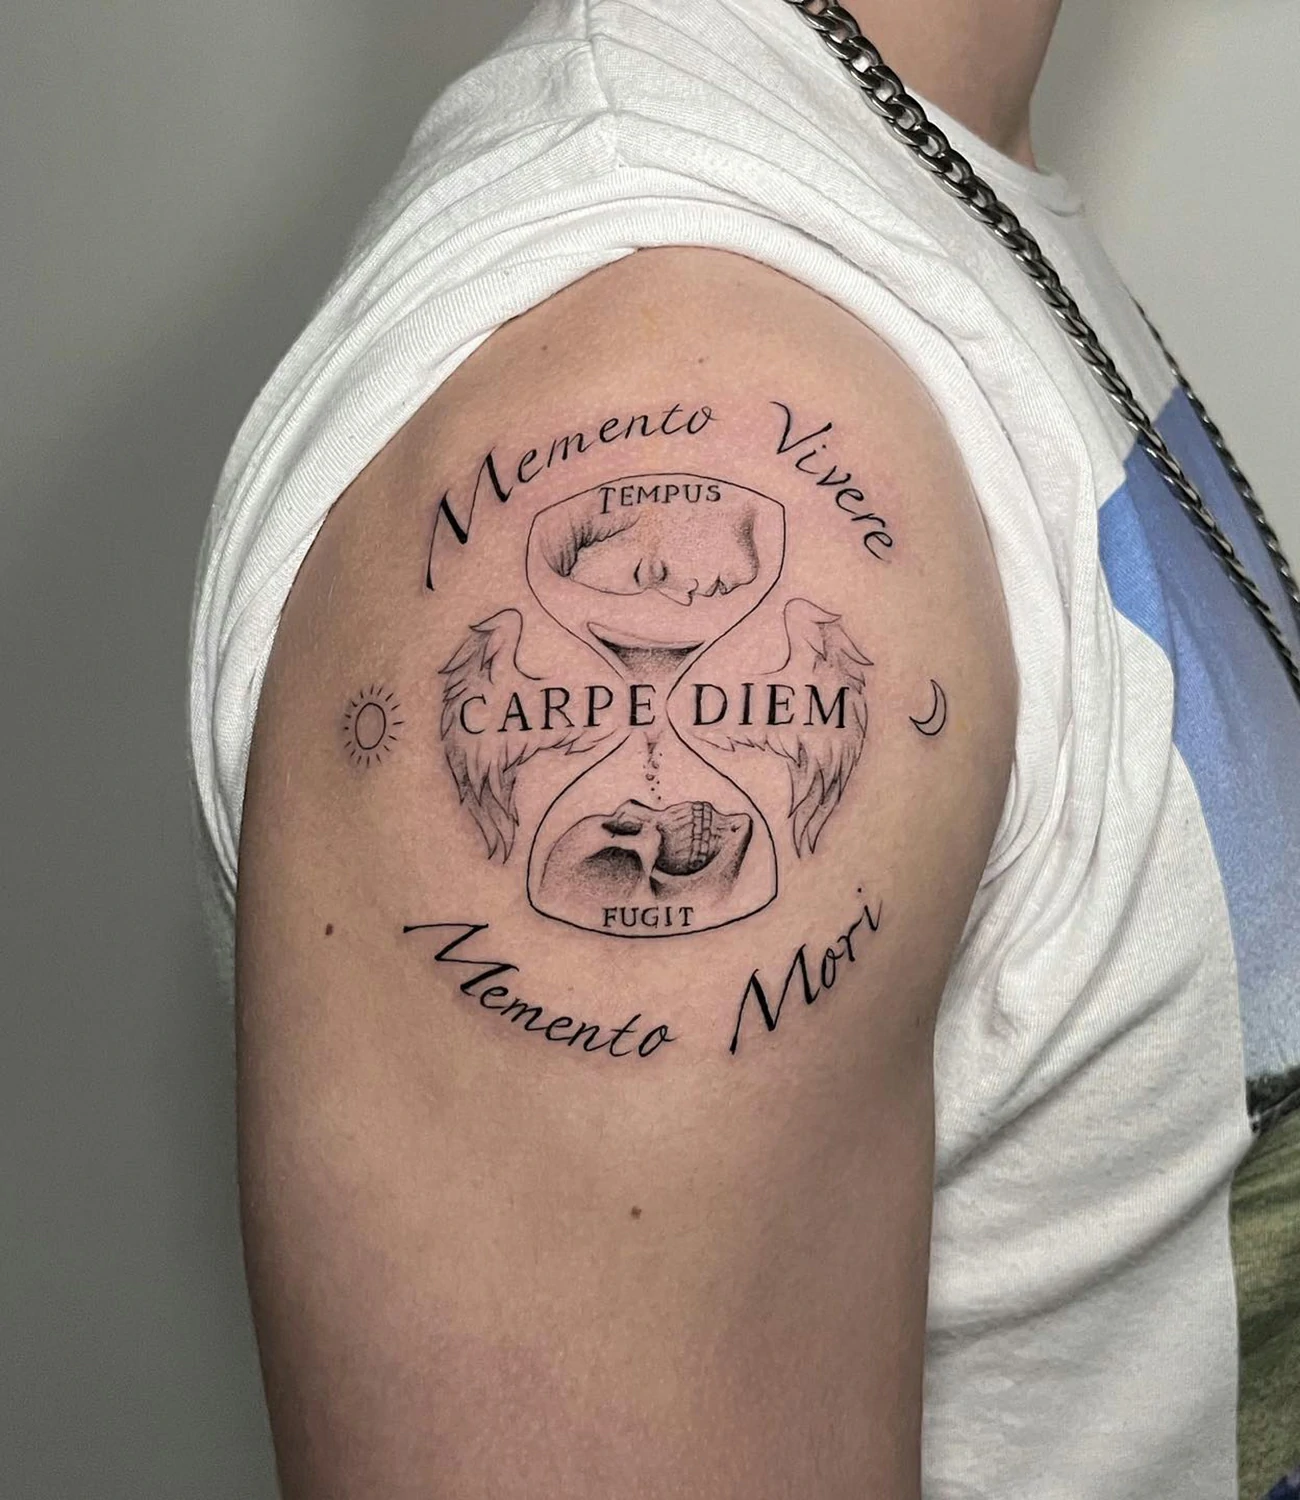 carpe diem memento mori tattoo: A tattoo that juxtaposes "memento mori" with "carpe diem," using imagery that contrasts the concepts of seizing the day and remembering mortality.